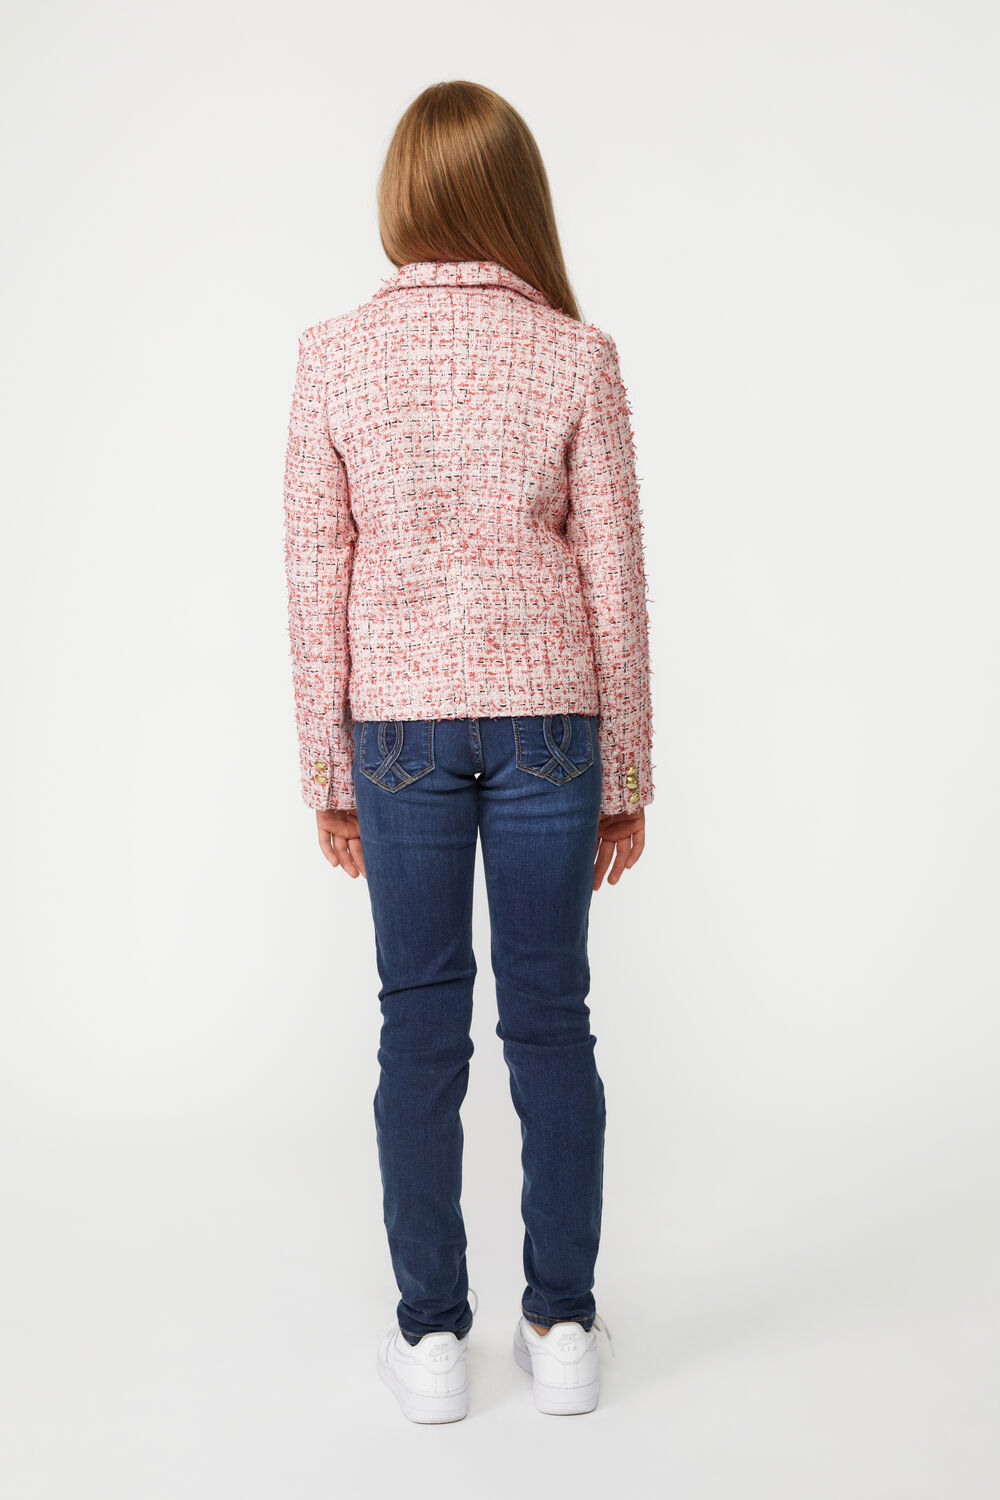 GIRLS ROMA BOUCLE BLAZER in colour MARY'S ROSE